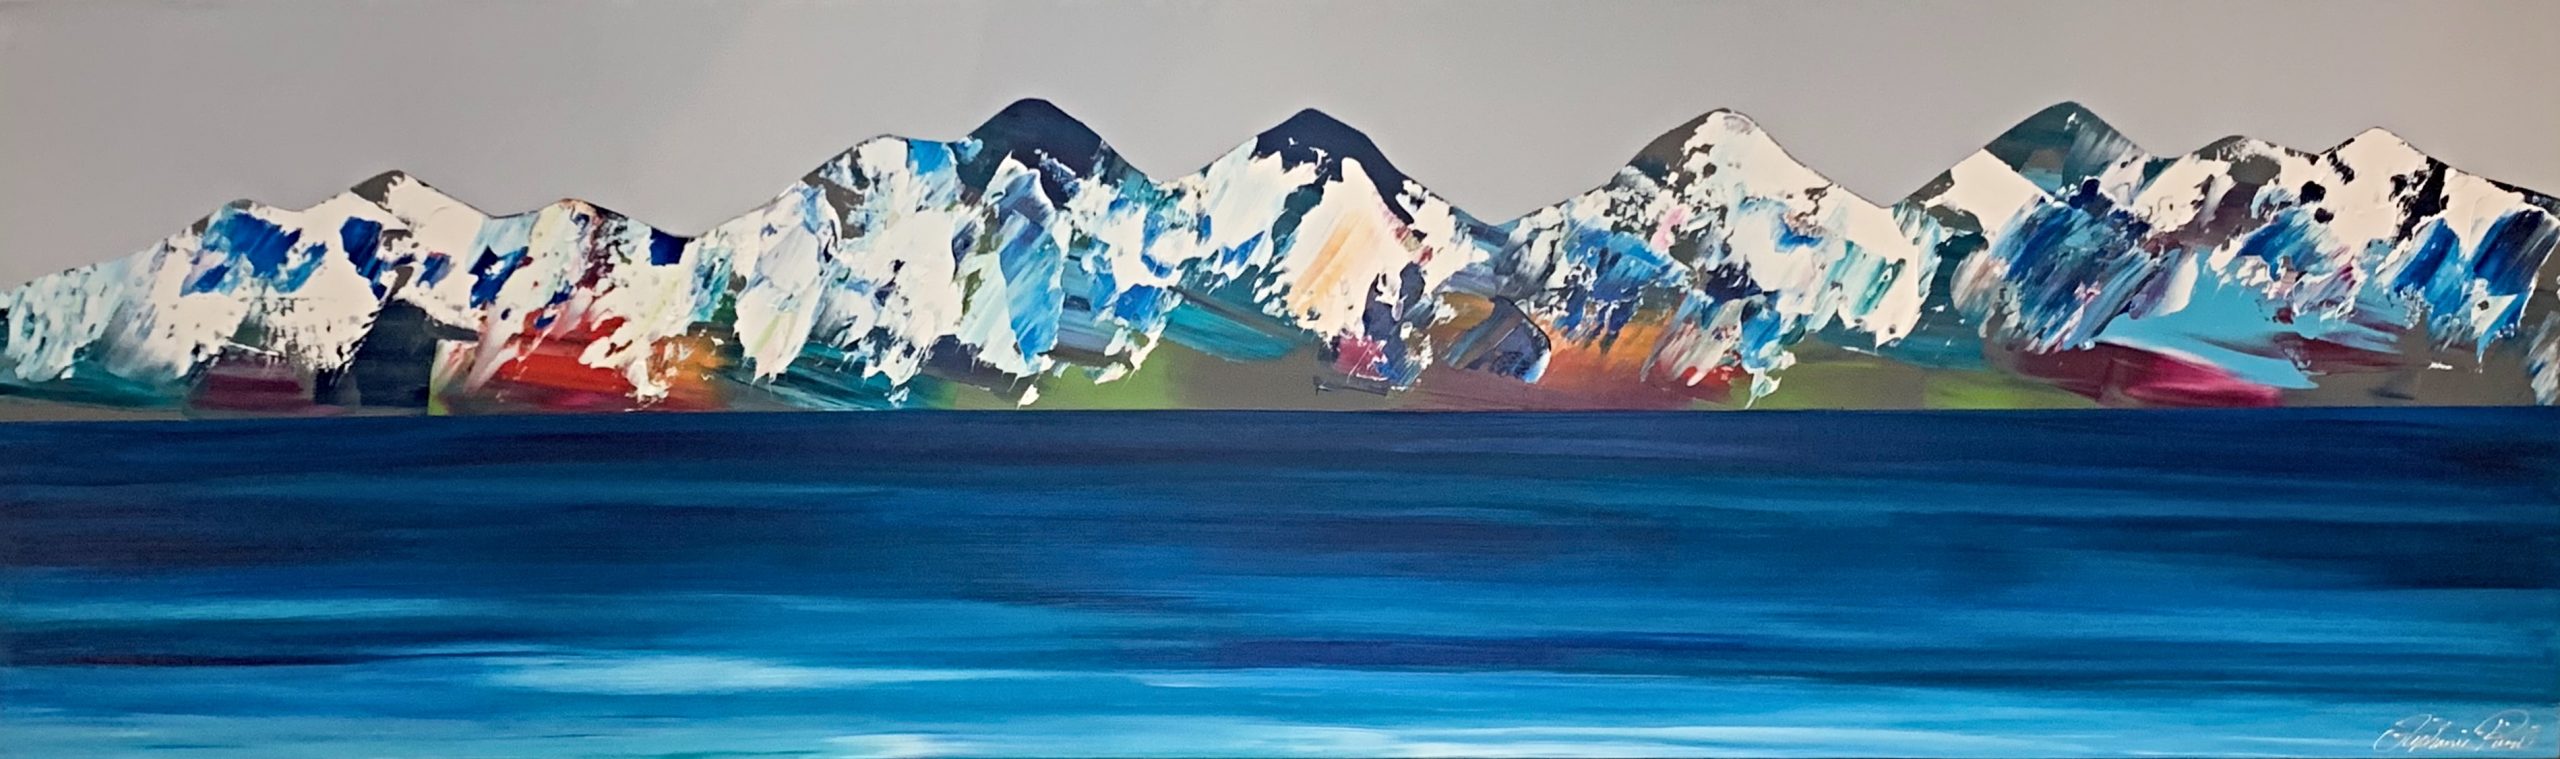 Rocheuse 221, abstract landscape by Stephanie Rivet | Effusion Art Gallery + Cast Glass Studio, Invermere BC